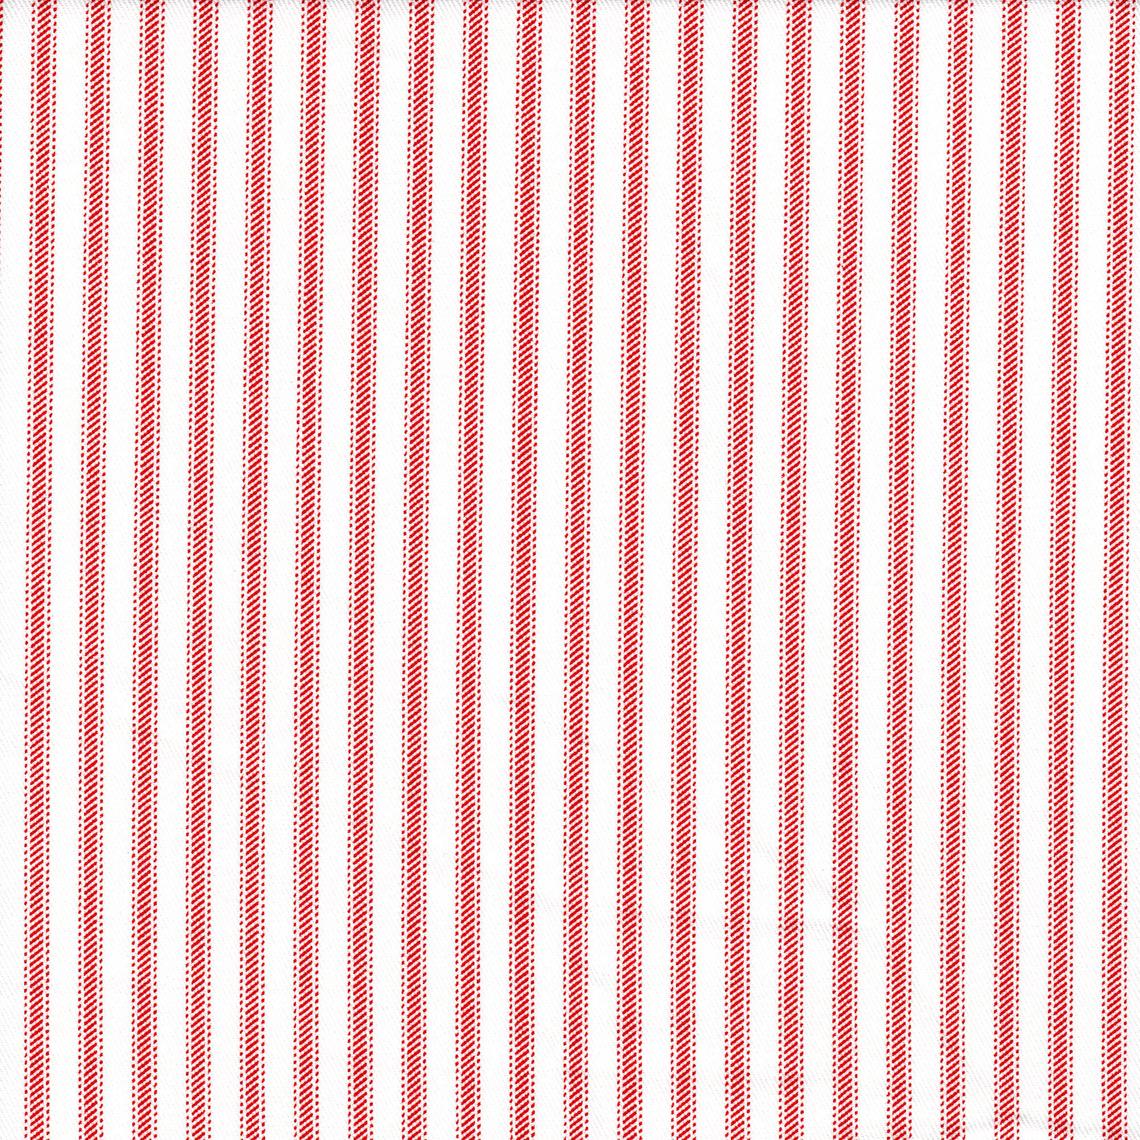 pillow sham in classic lipstick red ticking stripe on white